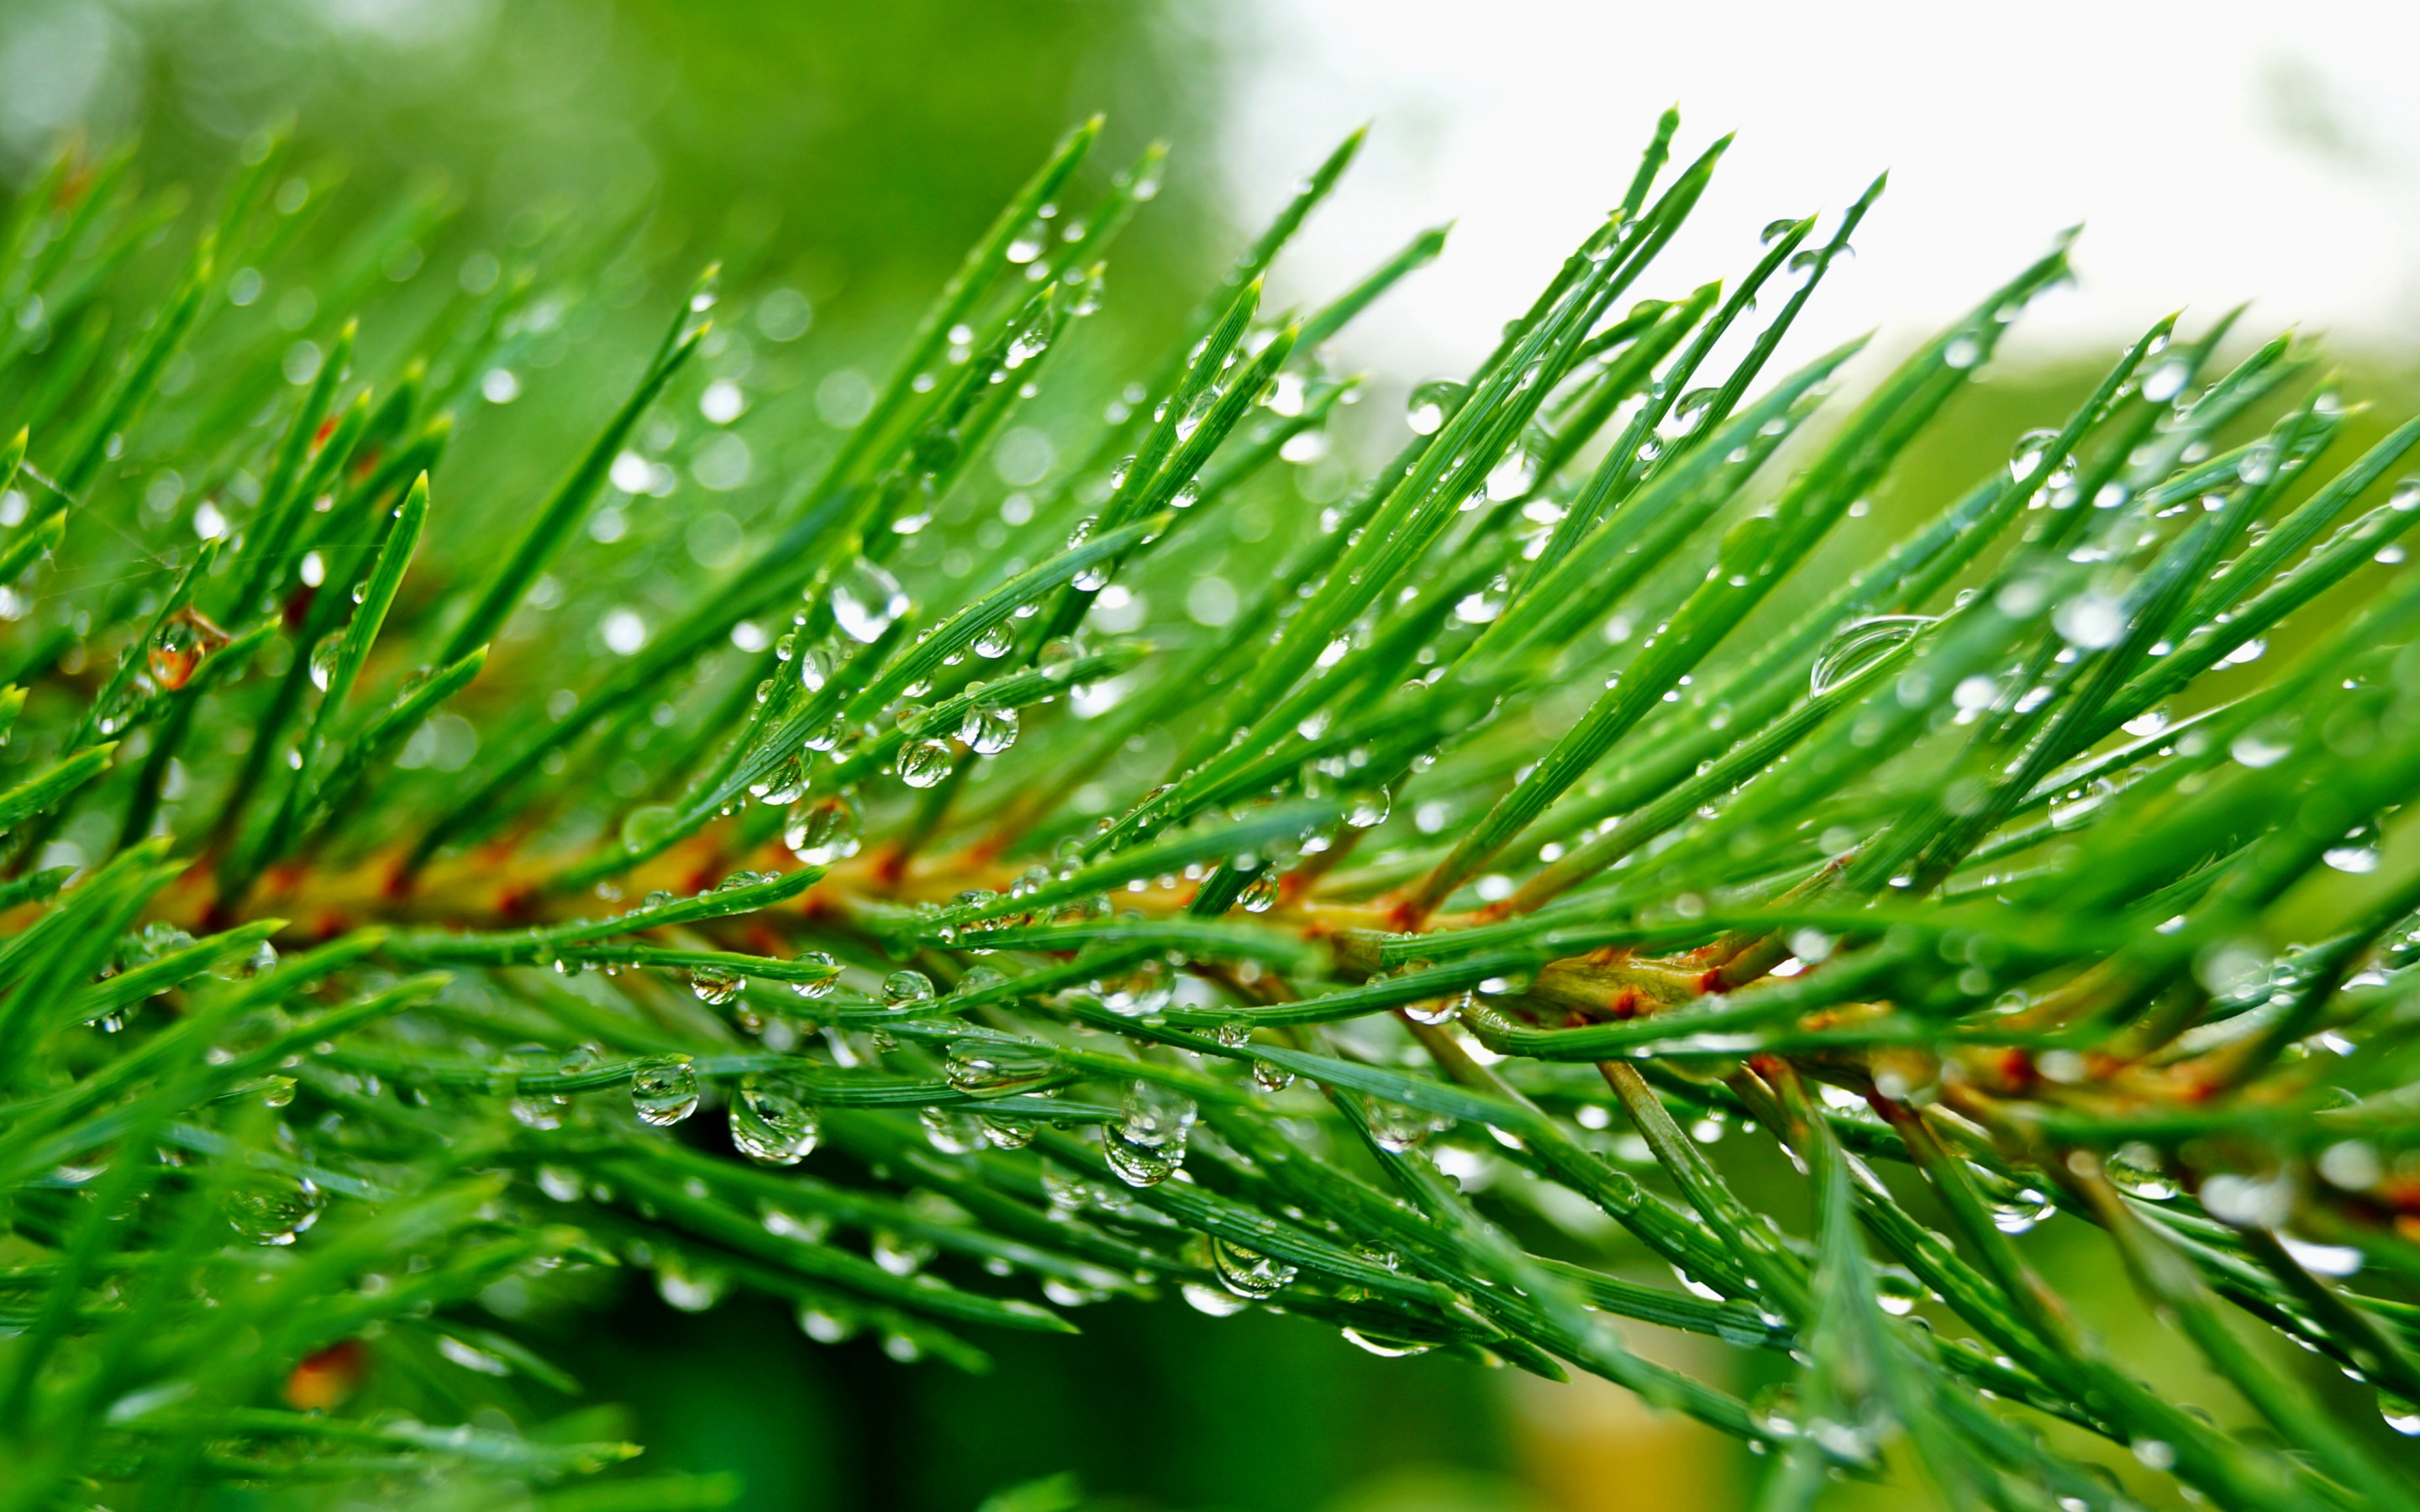 HD Pine Tree Wallpapers Download Free   869946